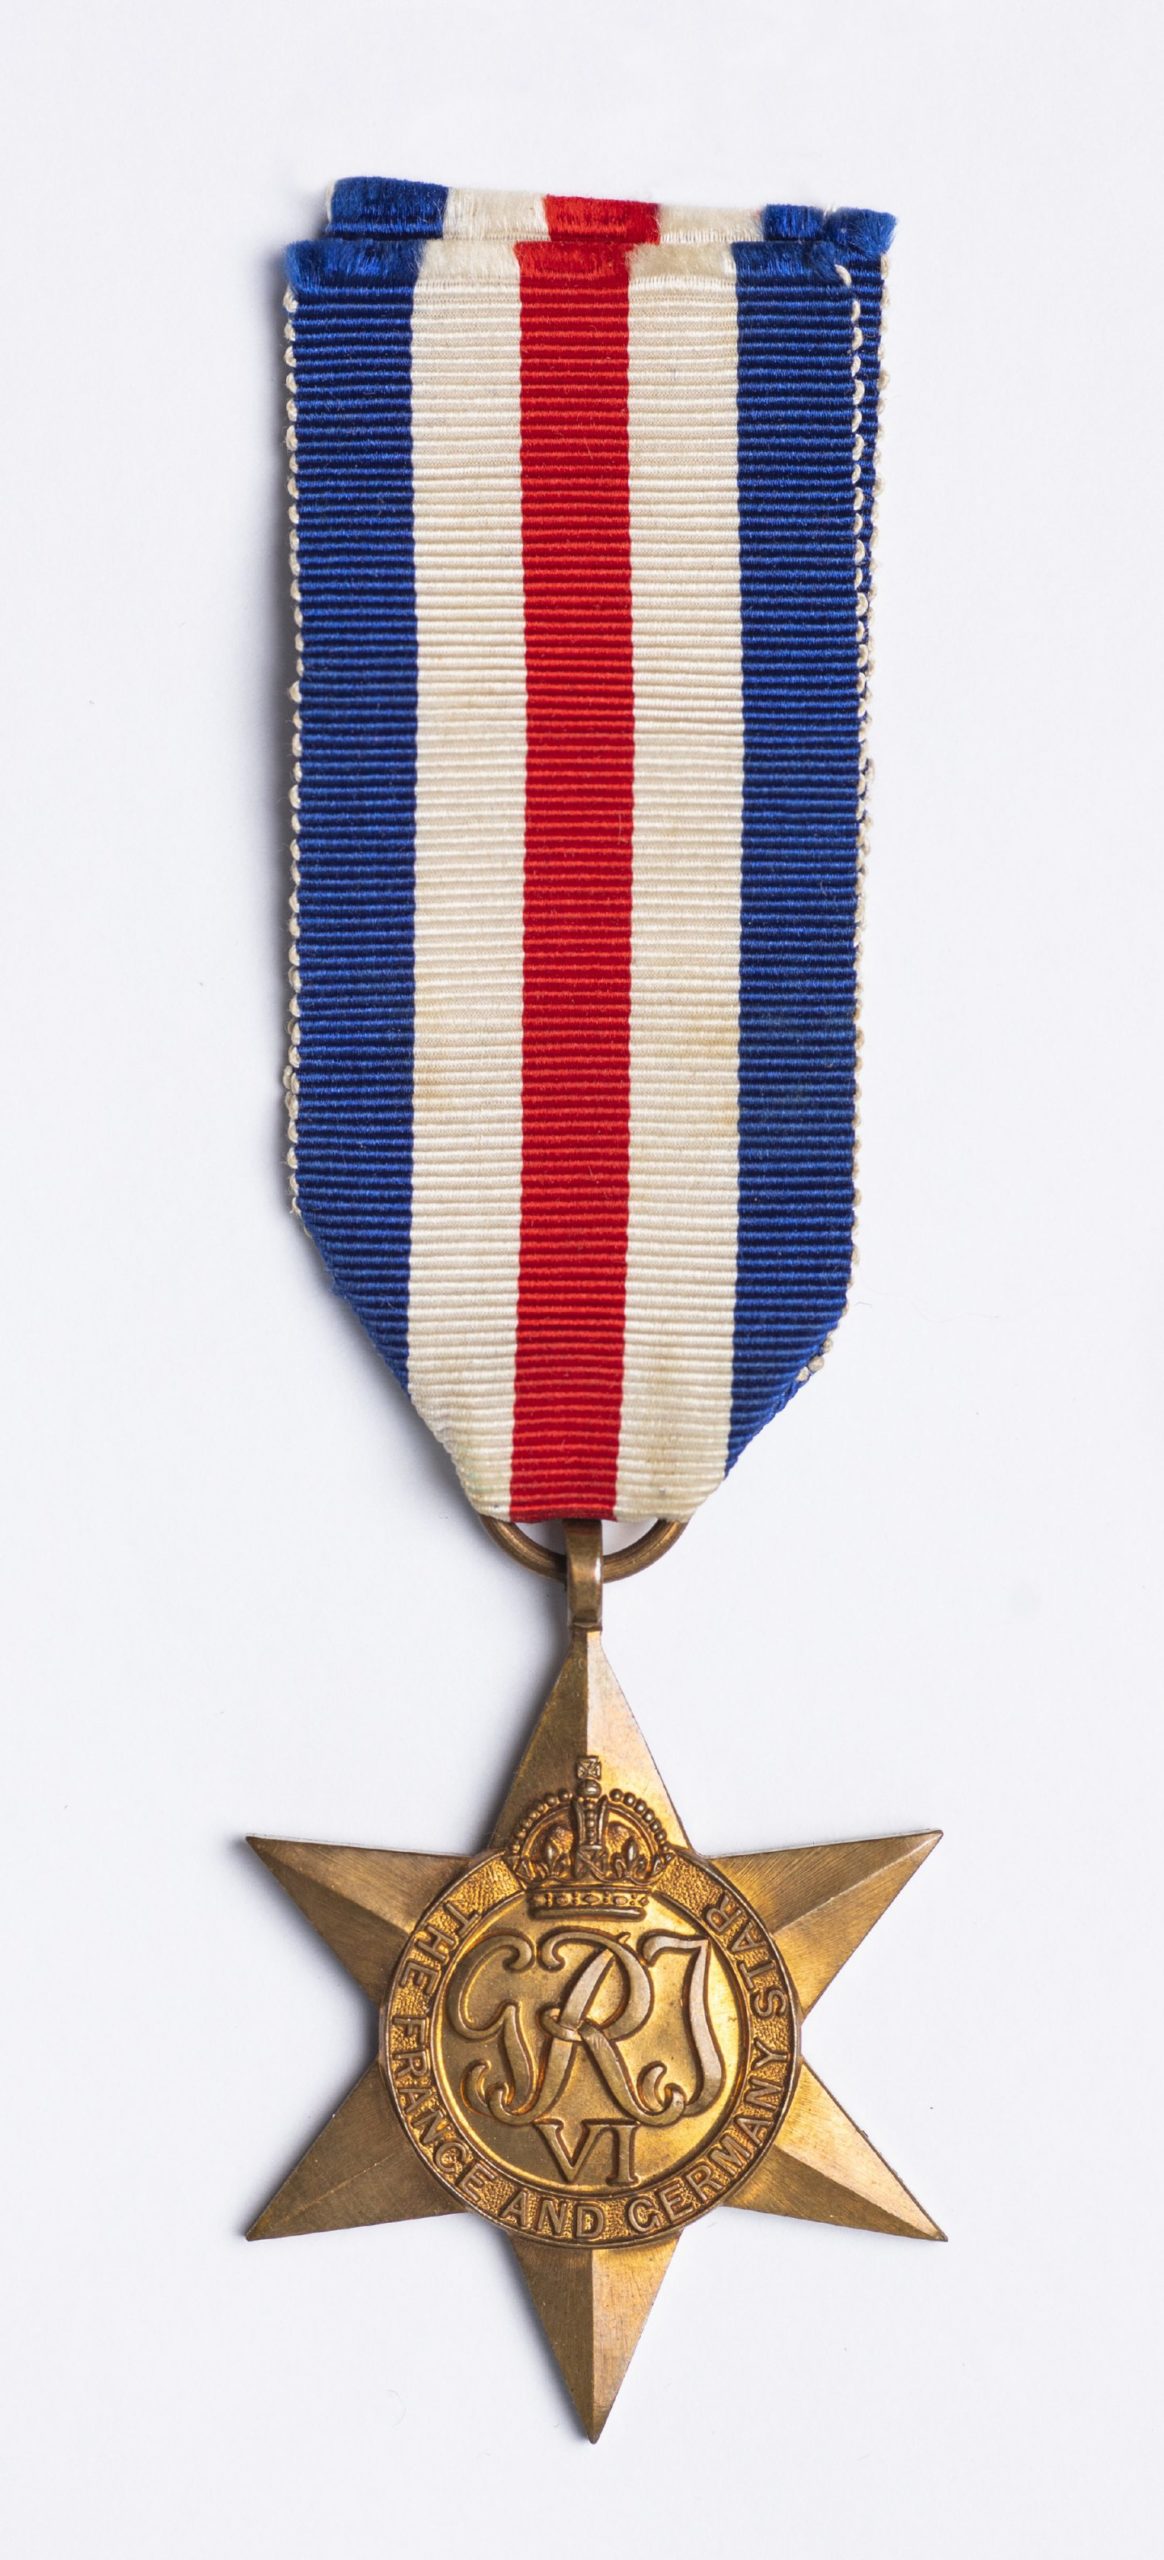 Tommy's France and Germany Star medal